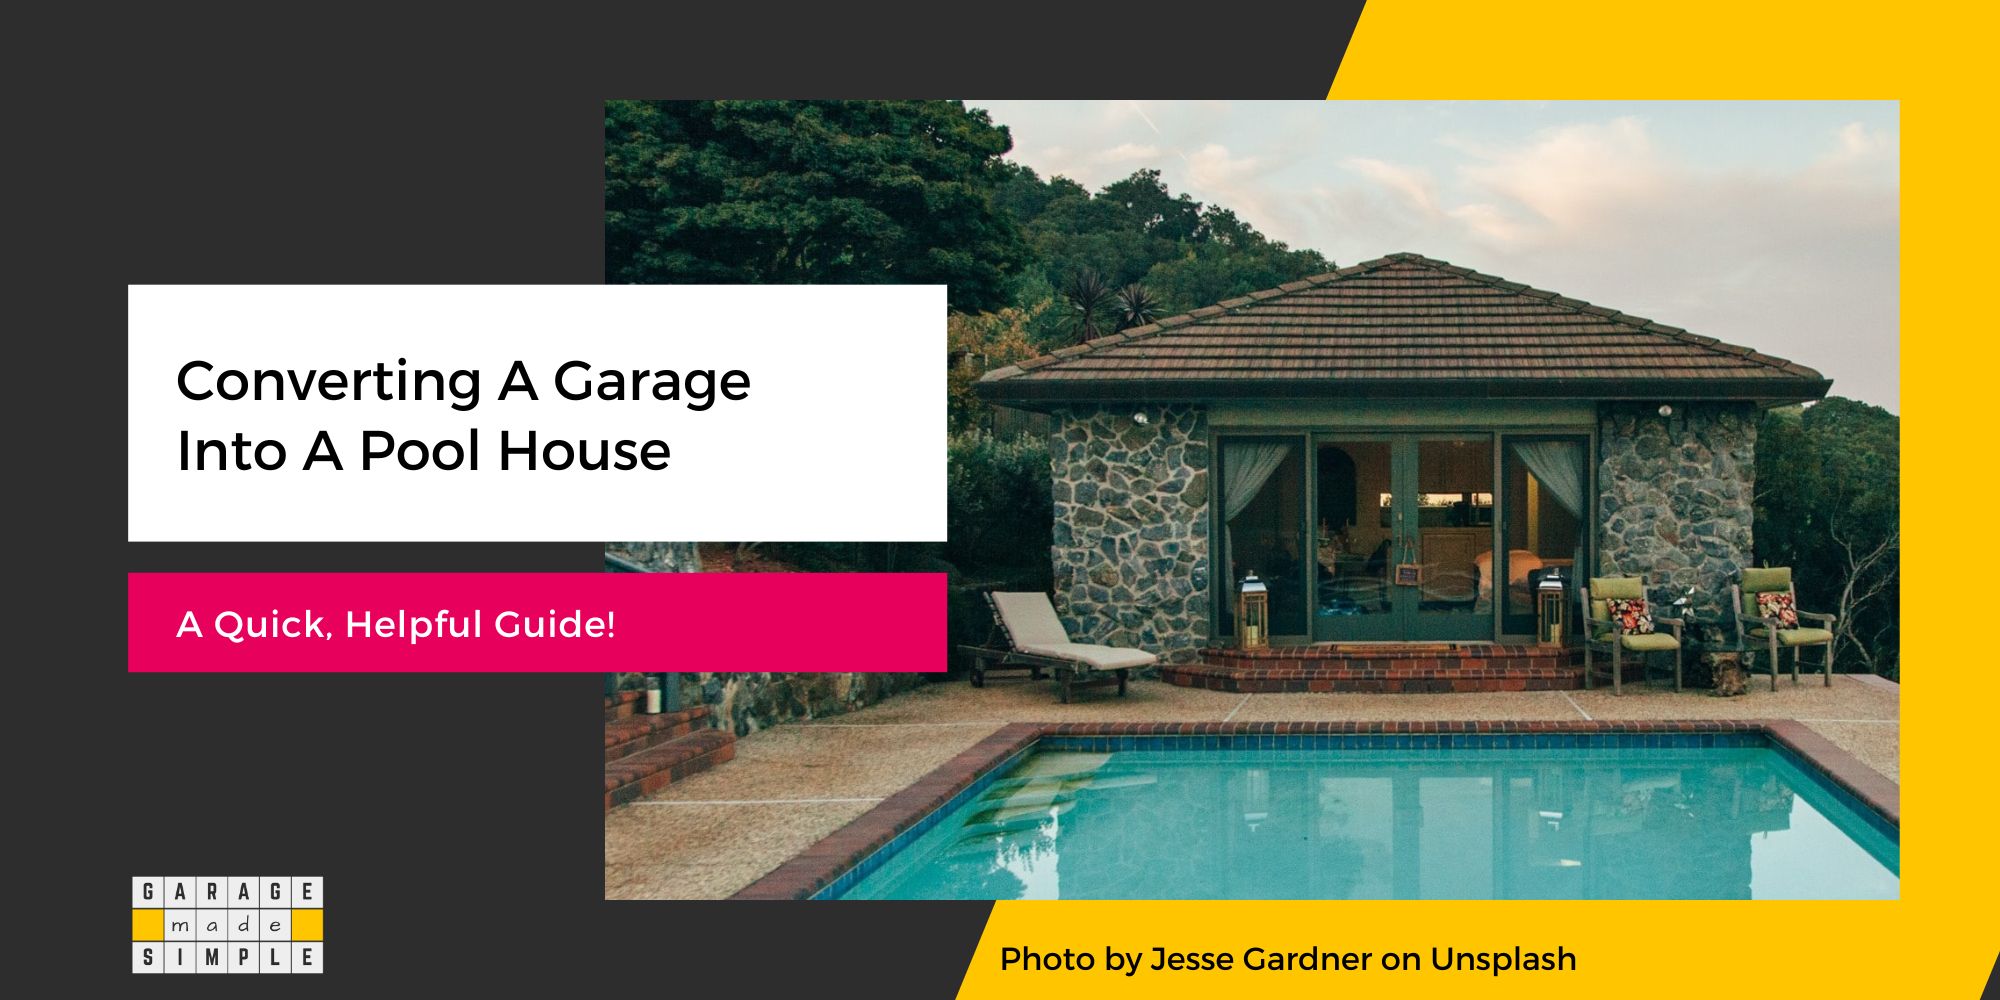 Garage Into Pool House: 5 Step Really Quick & Helpful Guide!